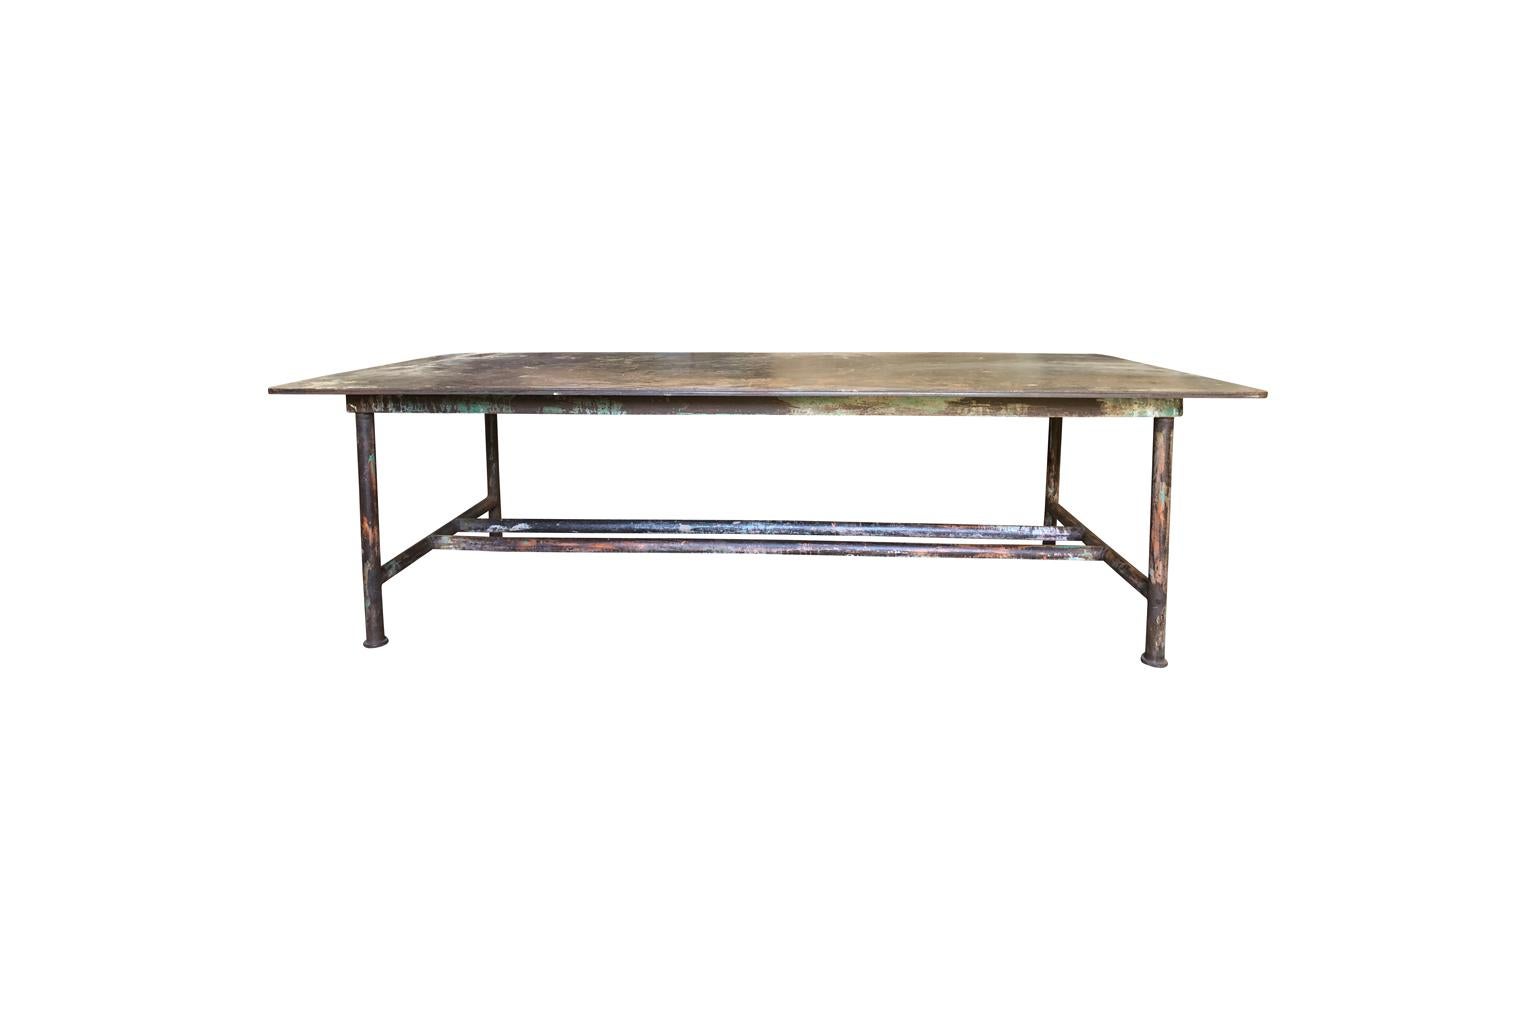 A terrific French early 20th century work table in iron. Super sturdy. Wonderful as a dining table as well.